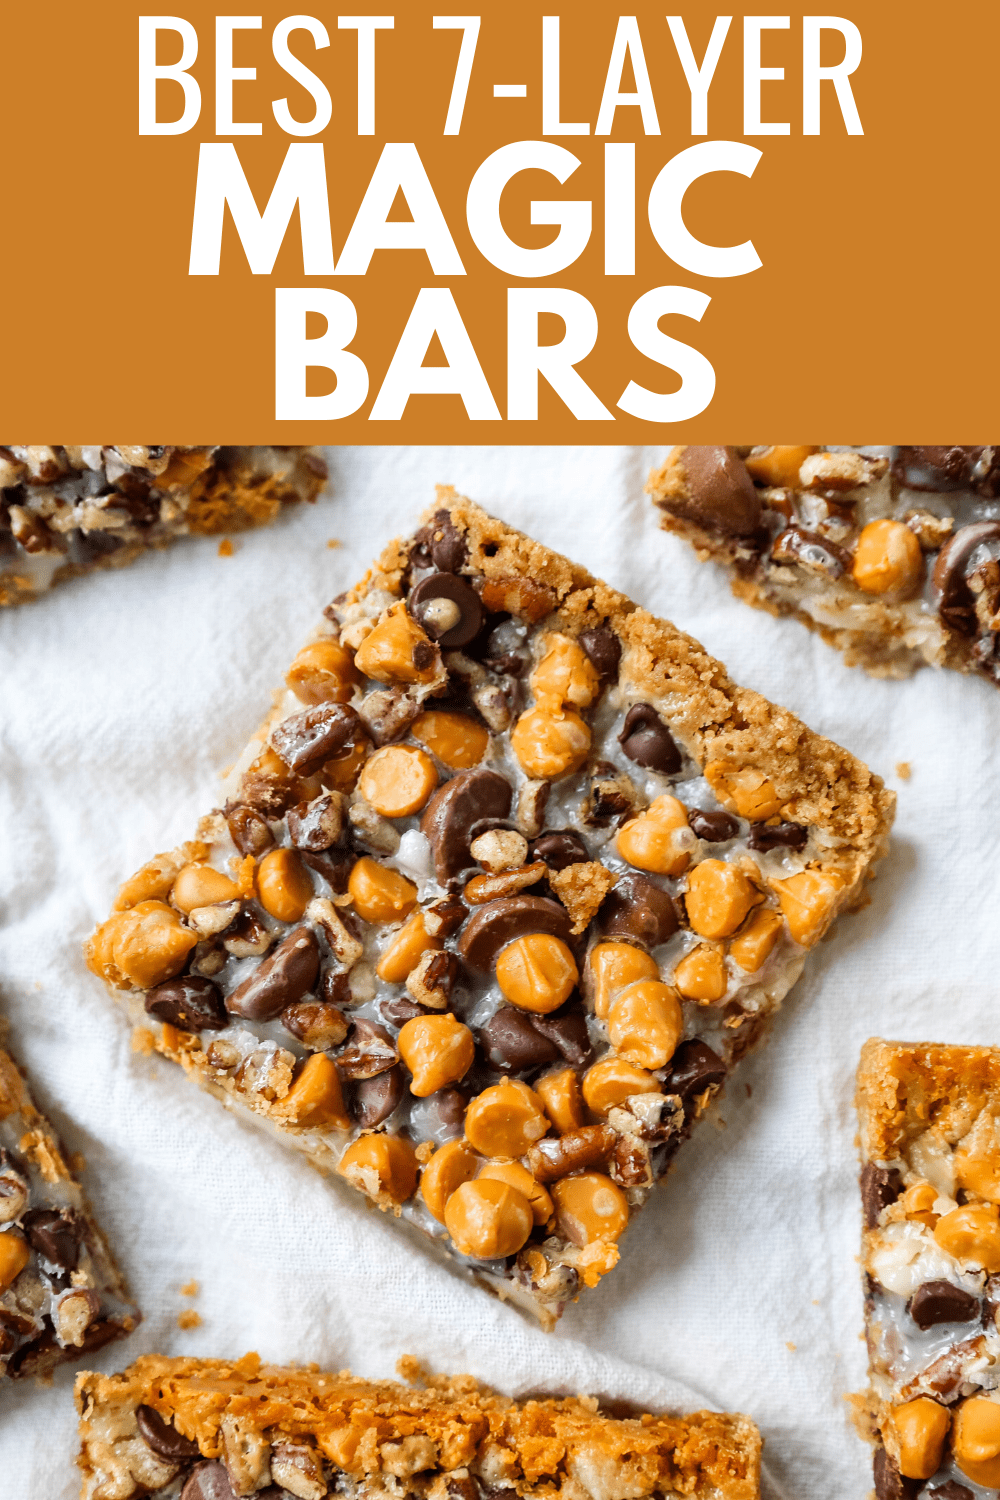 7-Layer Magic Bars. The famous dessert bars made with a graham cracker crust, sweetened flaked coconut, chocolate chips, butterscotch chips, nuts, all drizzled with sweetened condensed milk. The perfect dessert bar recipe! www.modernhoney.com #7layerbars #magicbars #magiccookiebars #sevenlayerbars